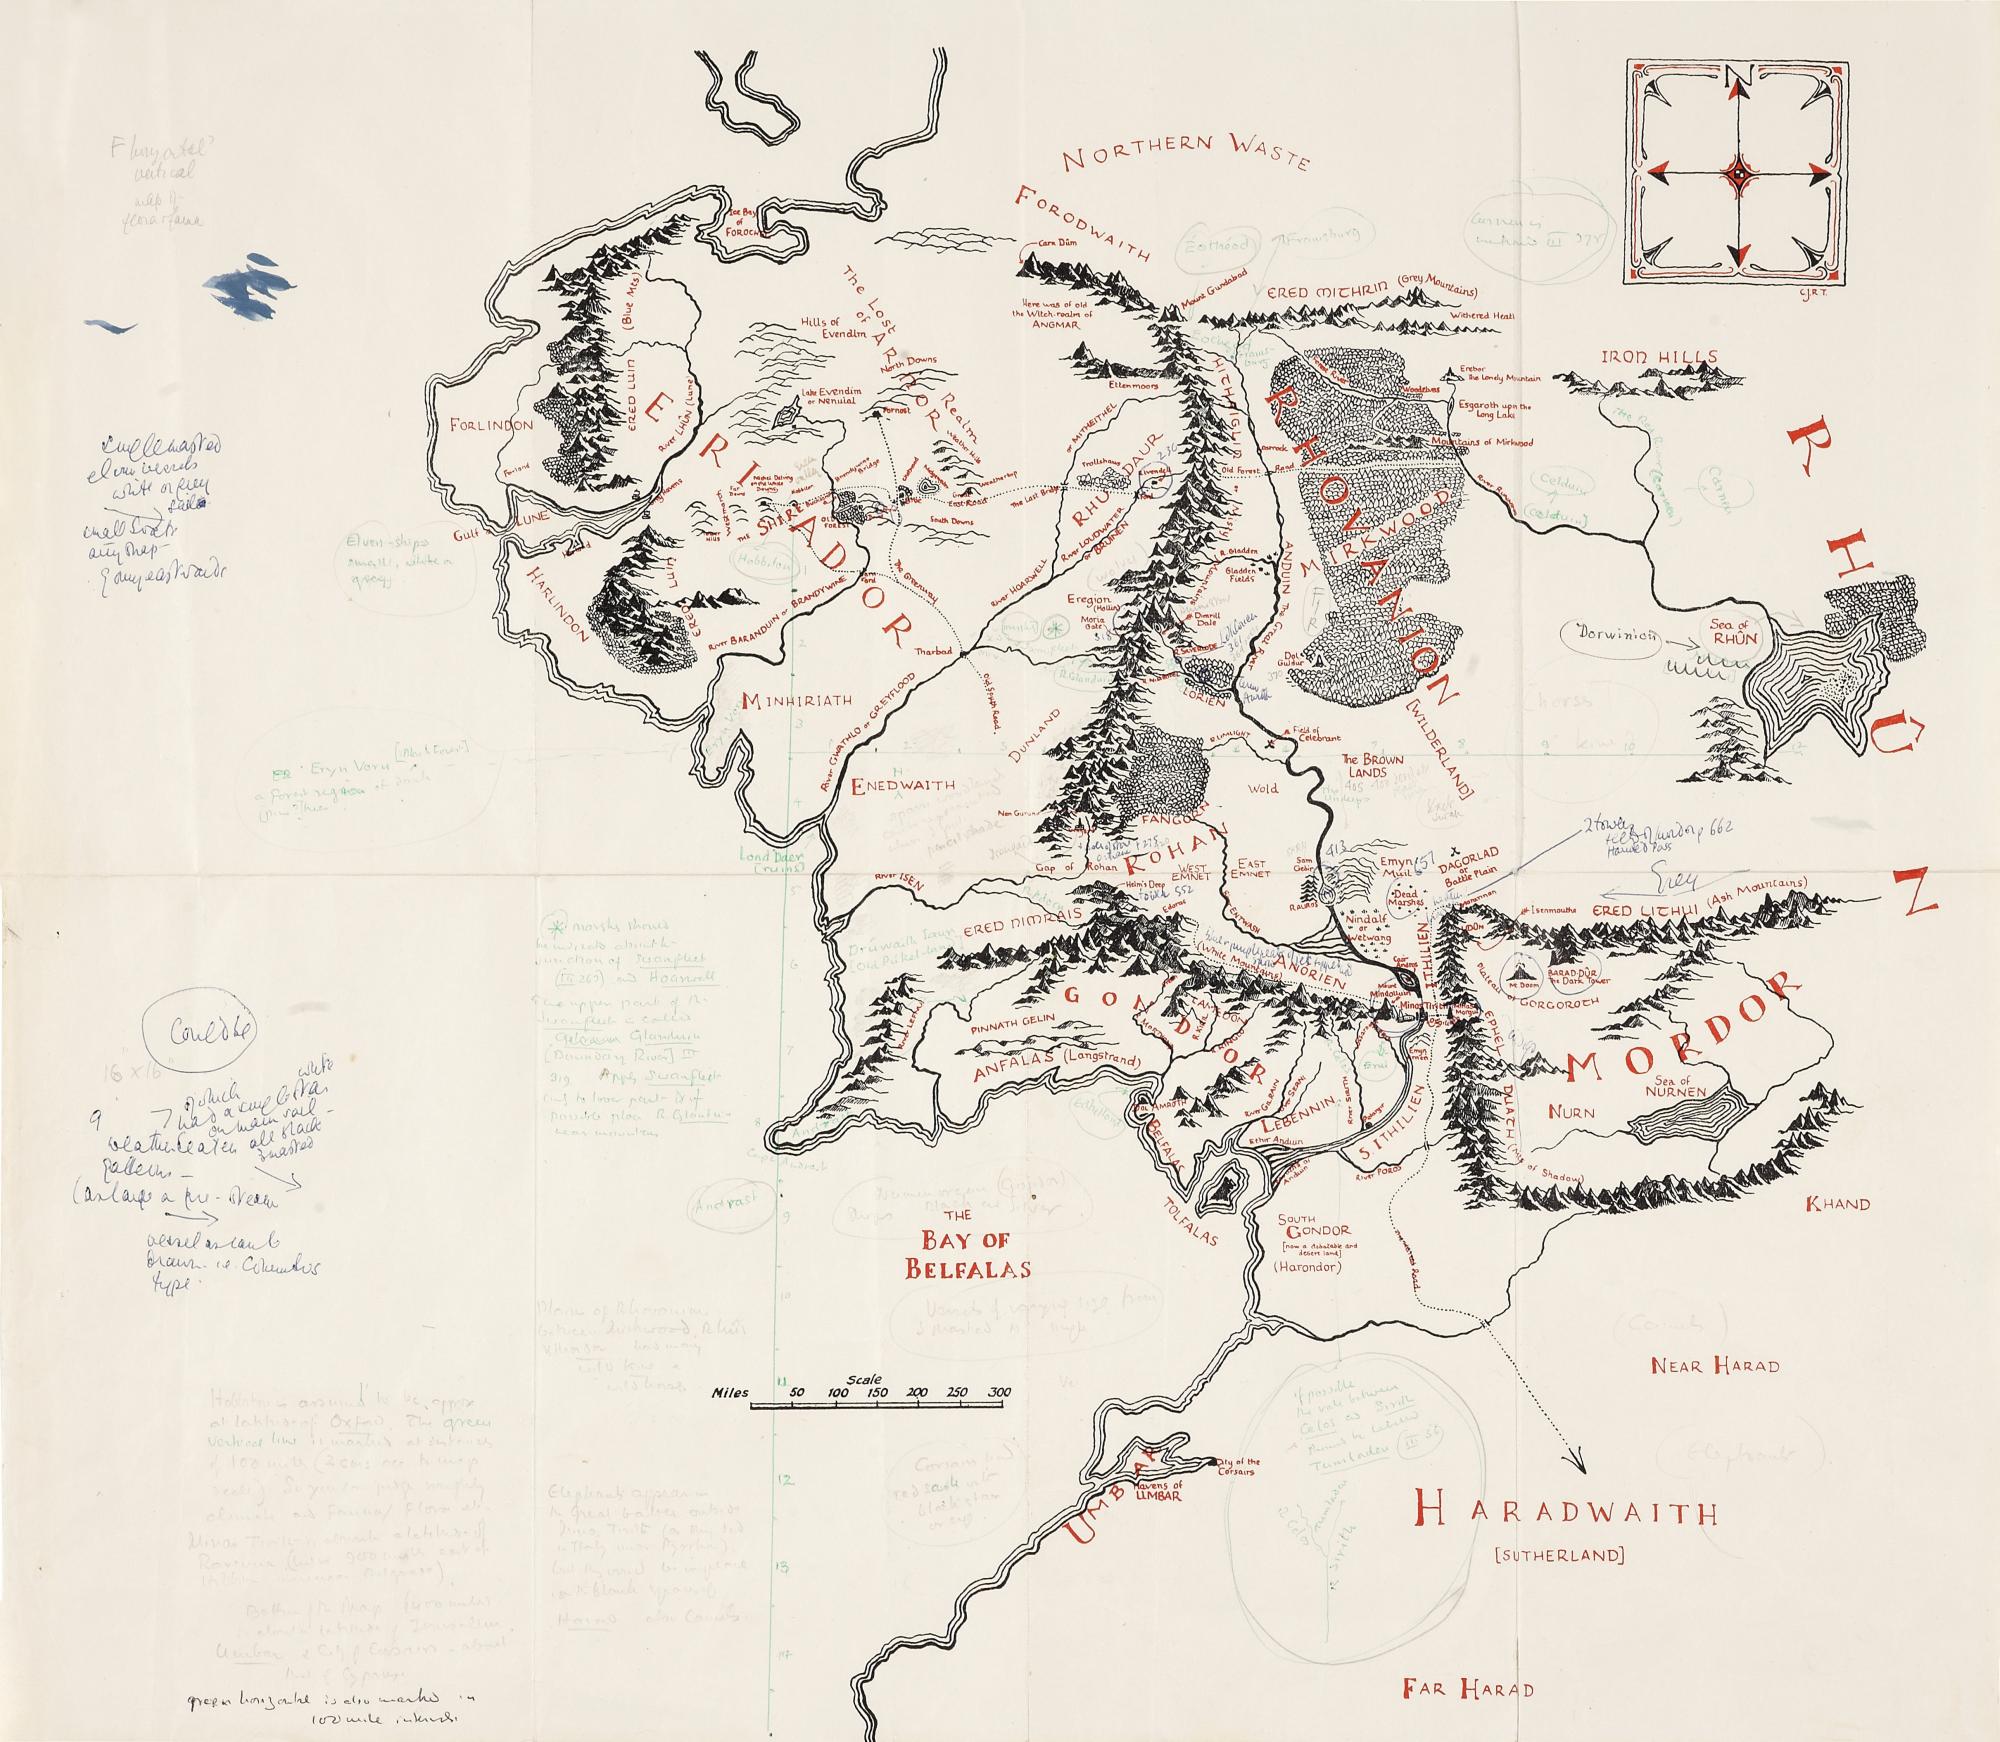 A further evolution of the MERP map of Minas Tirith, based on the